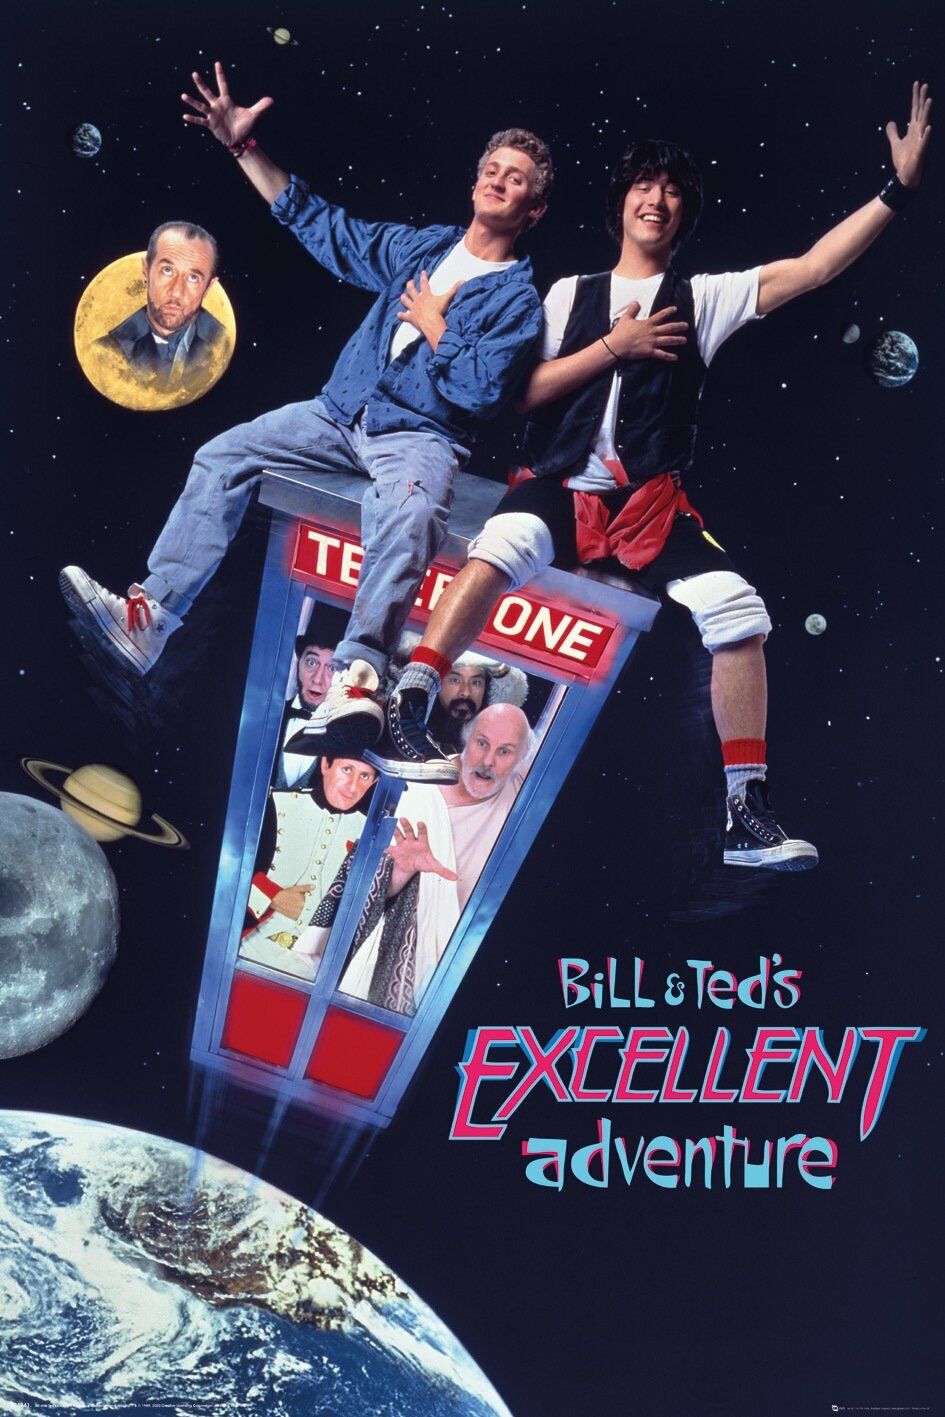 Bill & Ted's Excellent Adventure - Movie Poster (Regular Style)